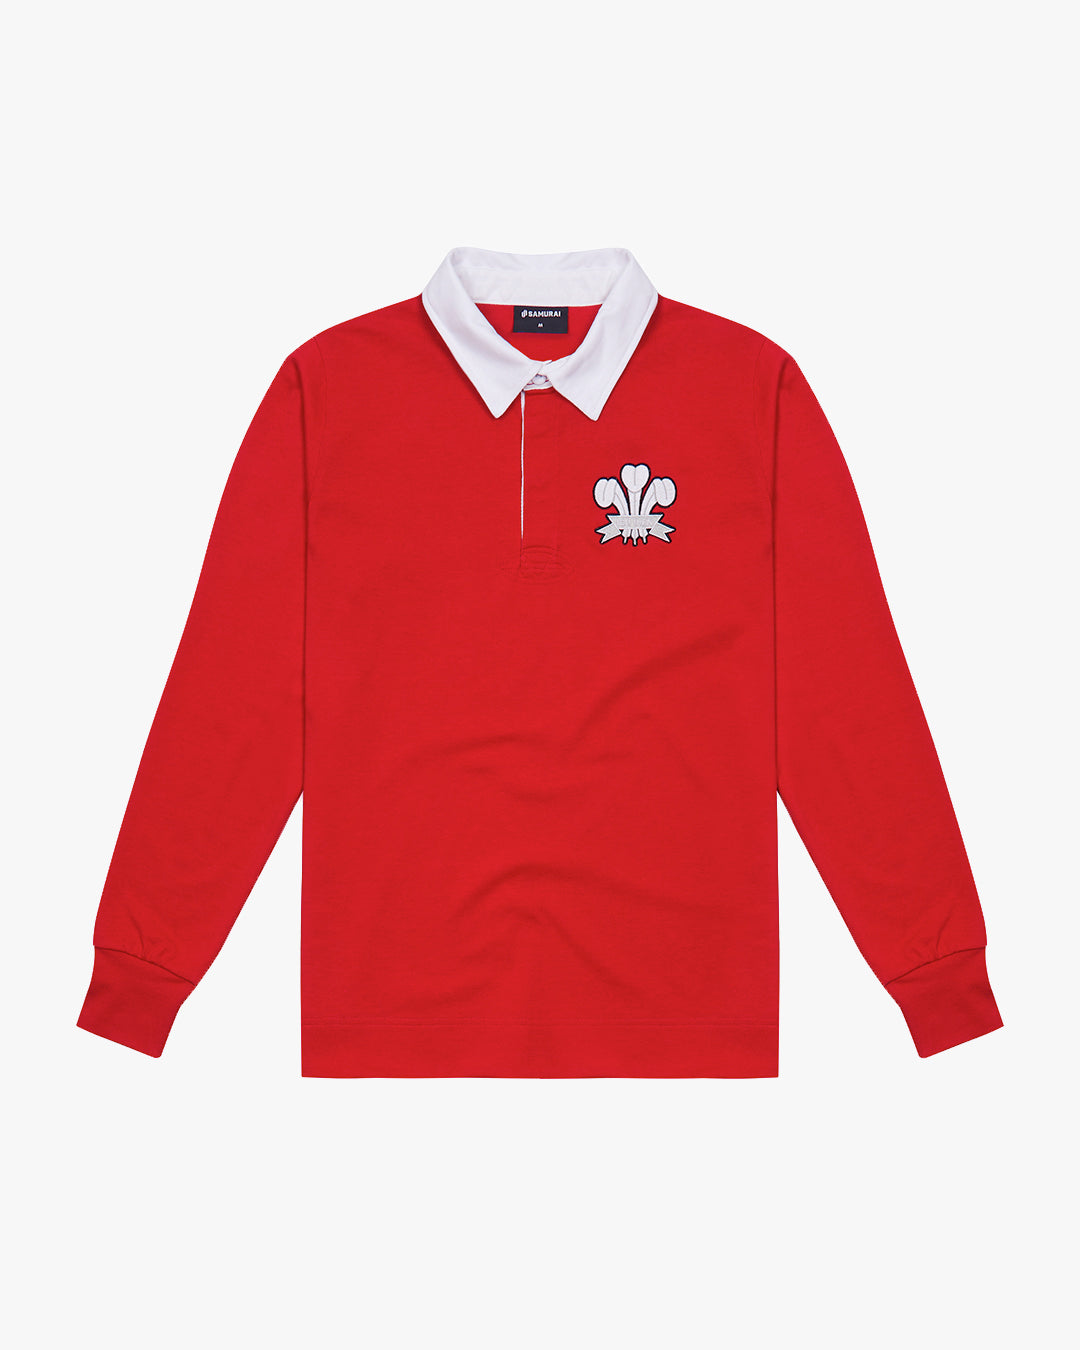 VC: GB-WLS - Women's Vintage Rugby Shirt - Wales